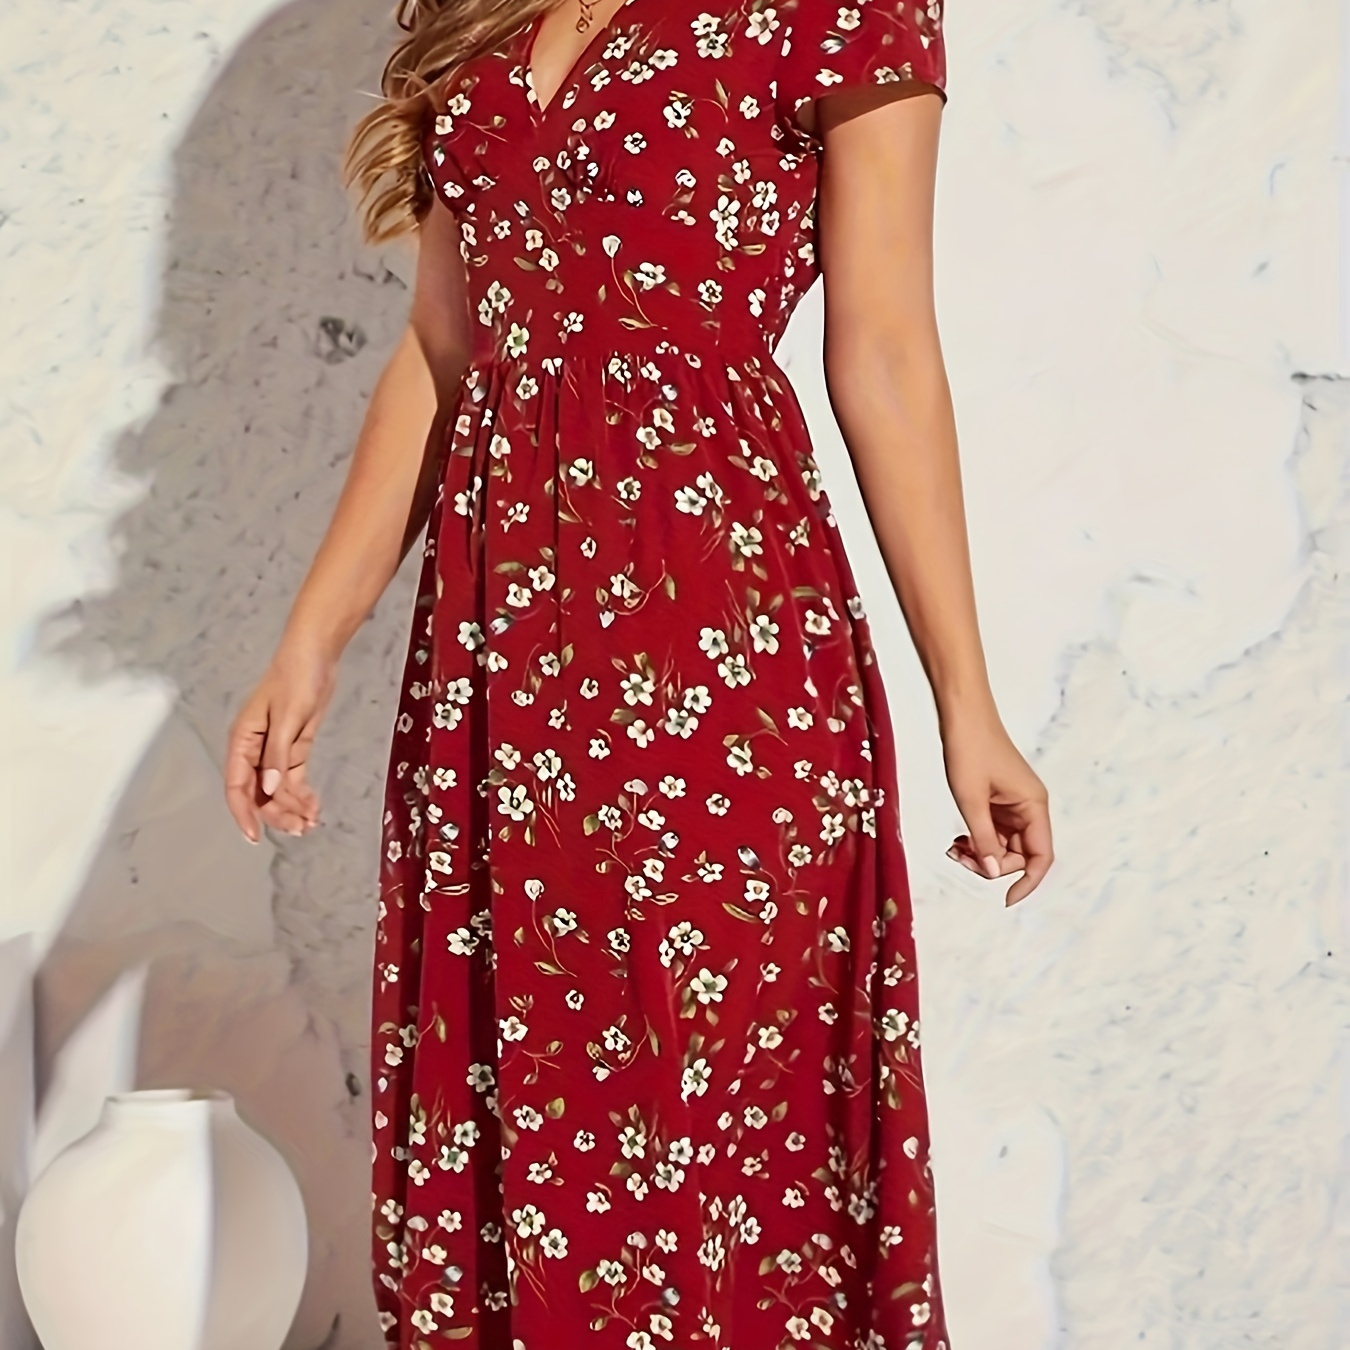 

Floral Print V-neck Dress, Casual Cap Sleeve Midi Dress For Spring & Summer, Women's Clothing